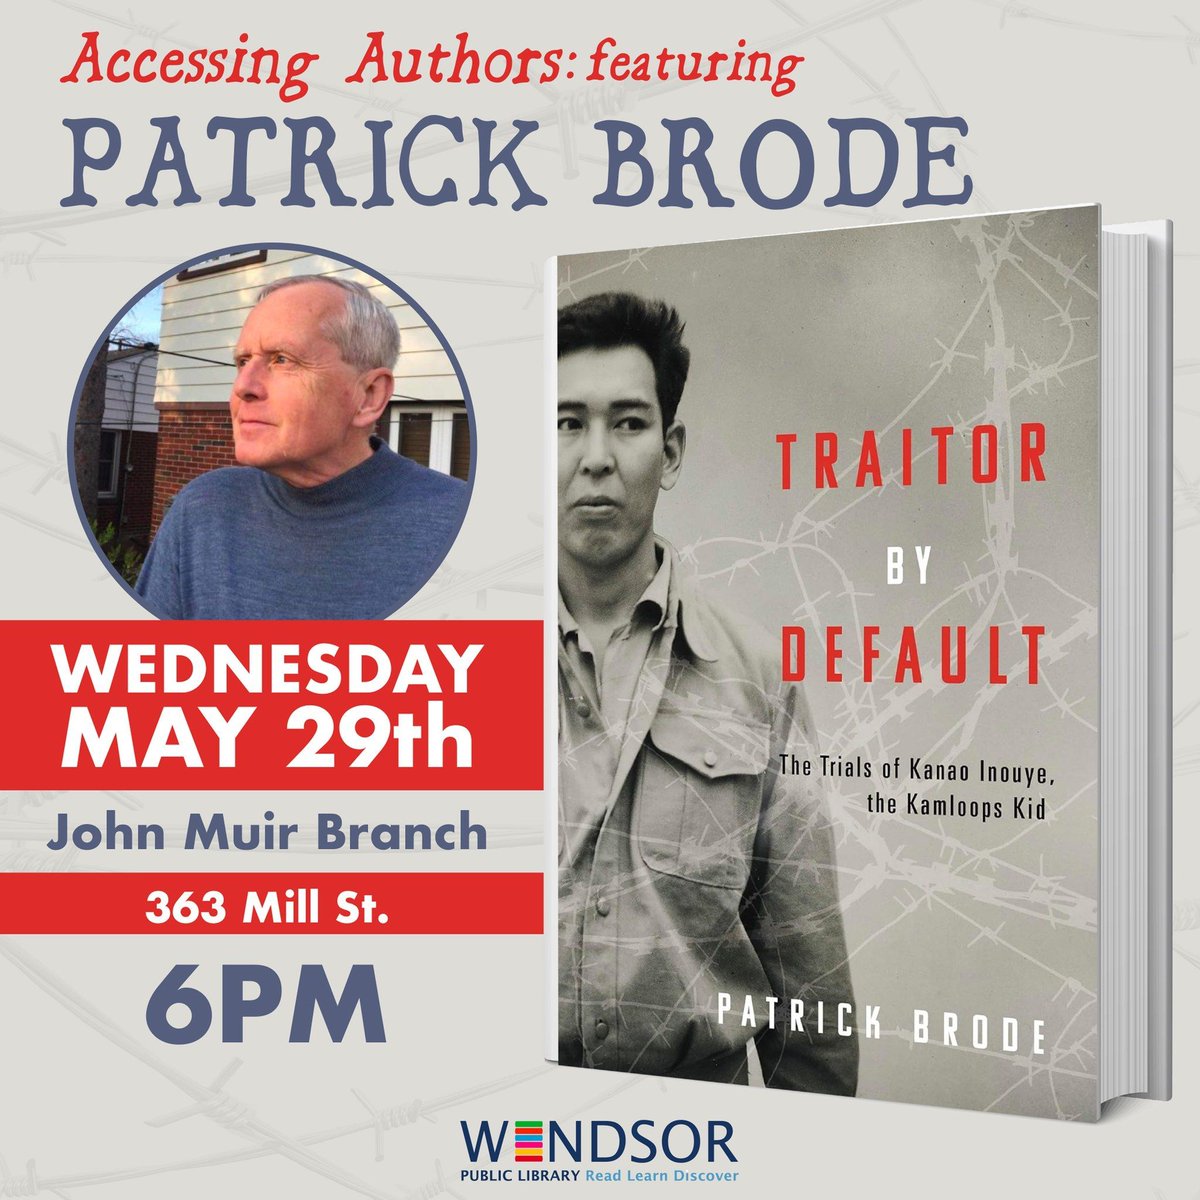 Join author Patrick Brode on Wednesday, May 29th at 6PM for the #Windsor book launch of TRAITOR BY DEFAULT at the John Muir branch of @windsorpublib! Learn more here: buff.ly/3wJRKh9 #BookLaunch #Ontario #Books #Nonfiction